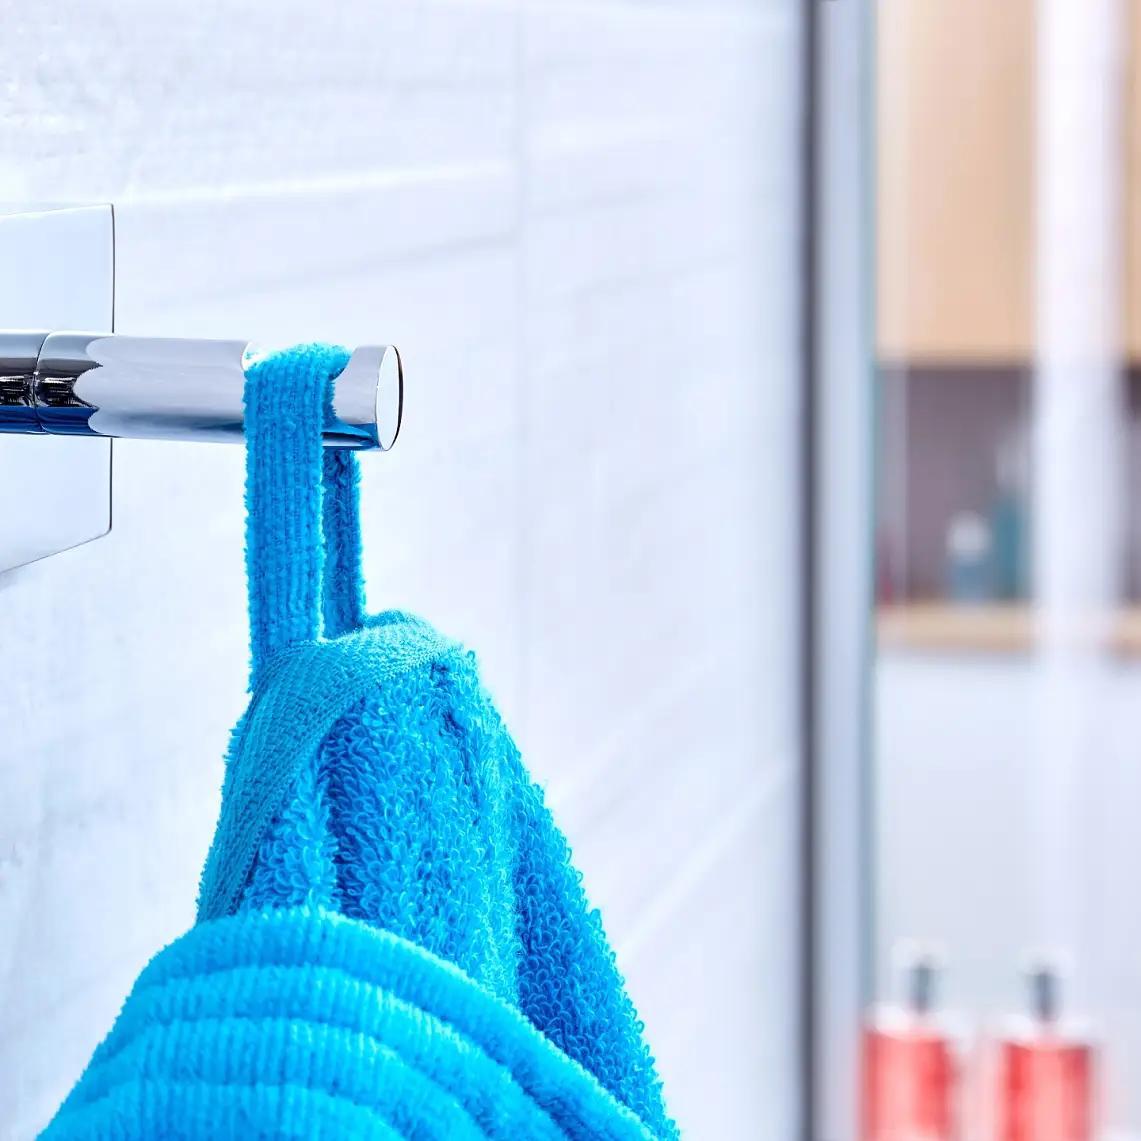 Because all of your towels and bathrobes need a place to hang out and stay dry before use.